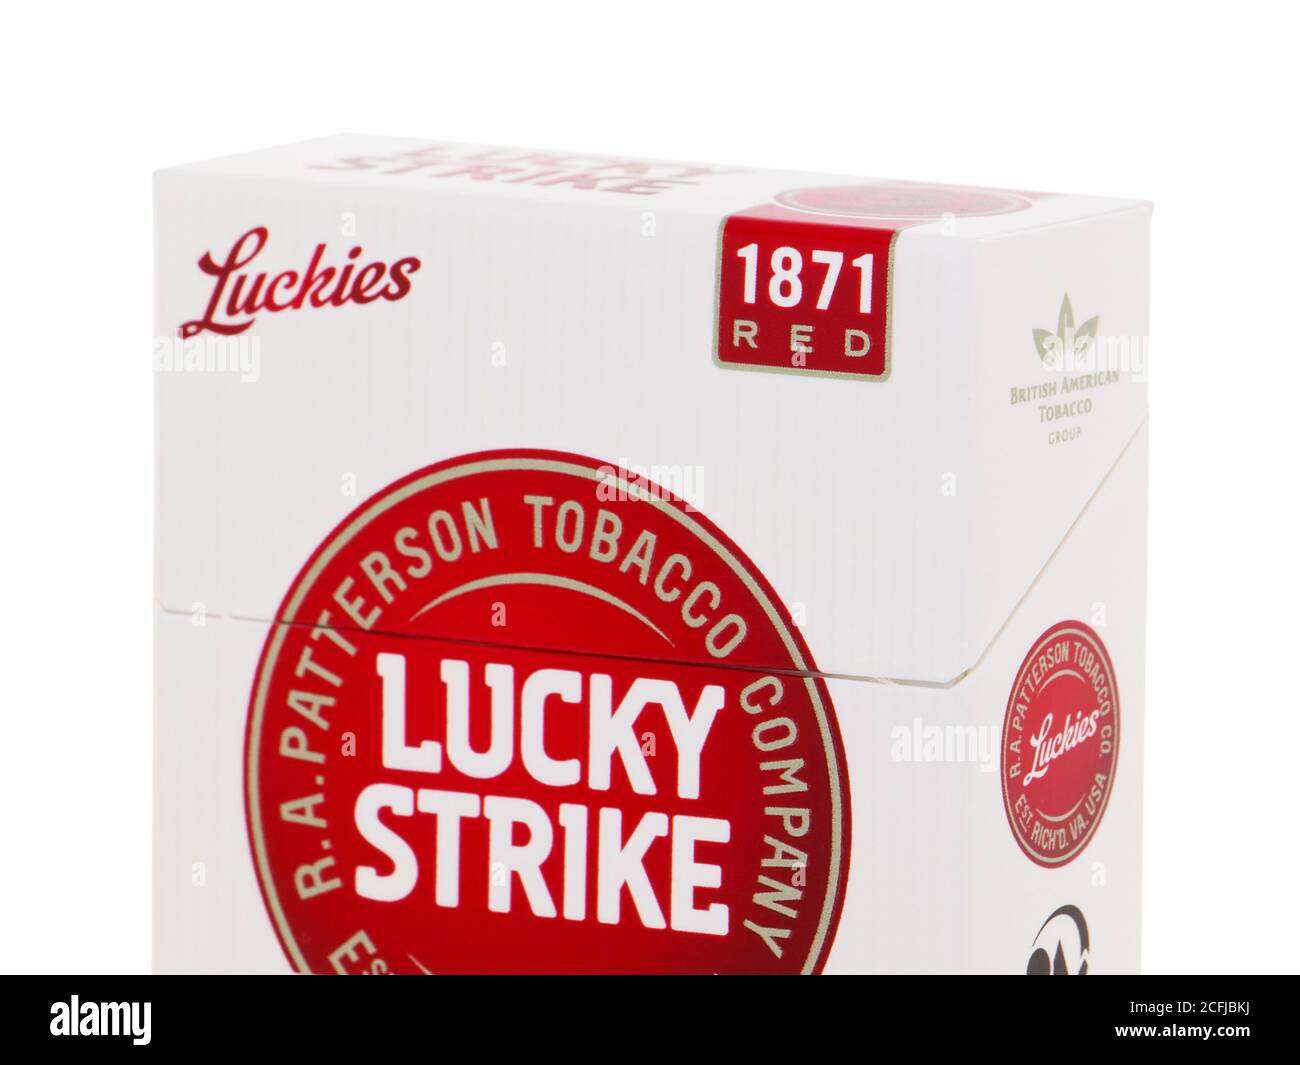 BUCHAREST, ROMANIA - APRIL 8, 2017. Lucky Strike Cigarette pack owned by the British American Tobacco Stock Photo